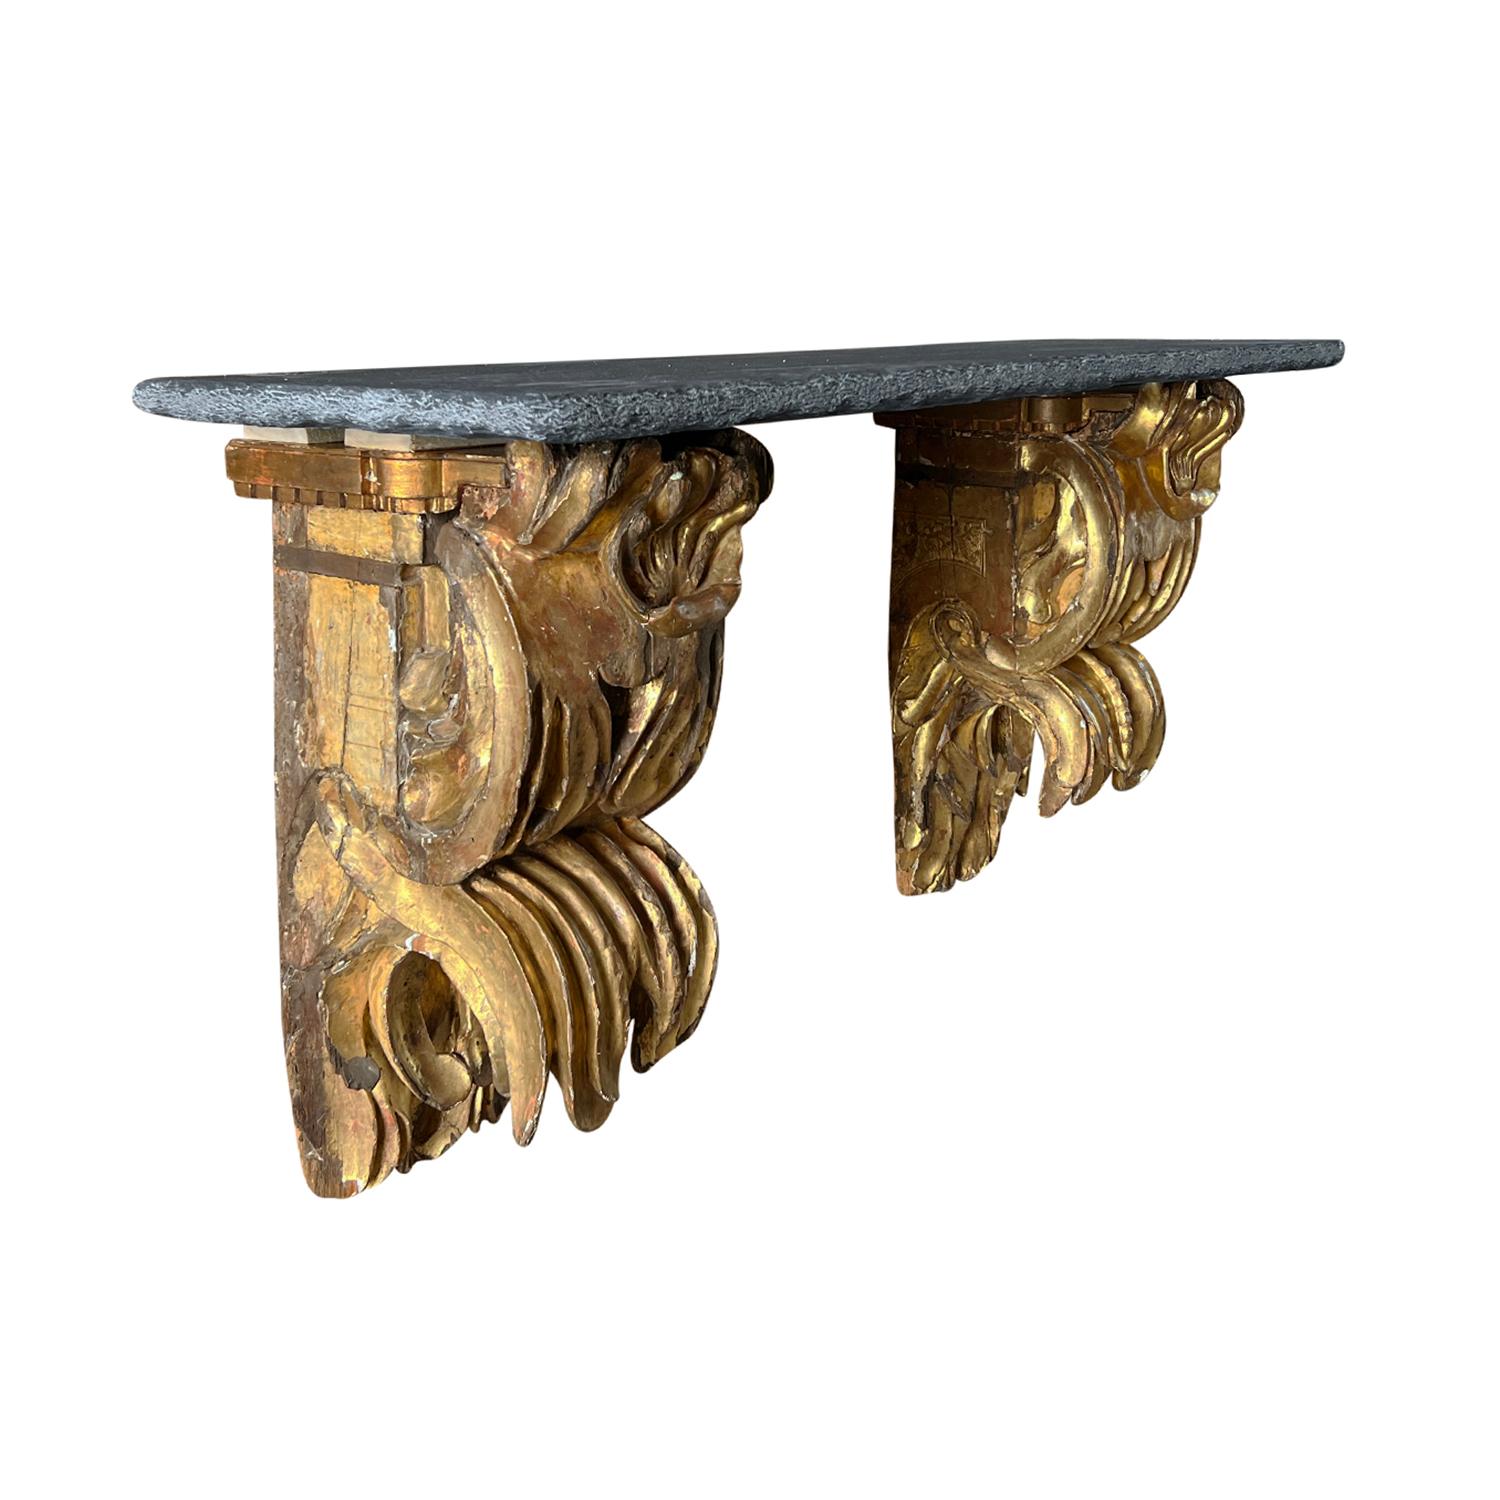 An important early 18th Century wall mount console or shelf with antique gilded wall sconces and topped with an aged Belgian Bluestone top, in good condition. The antique pair of sensational late Renaissance/early Baroque sconces show an authentic